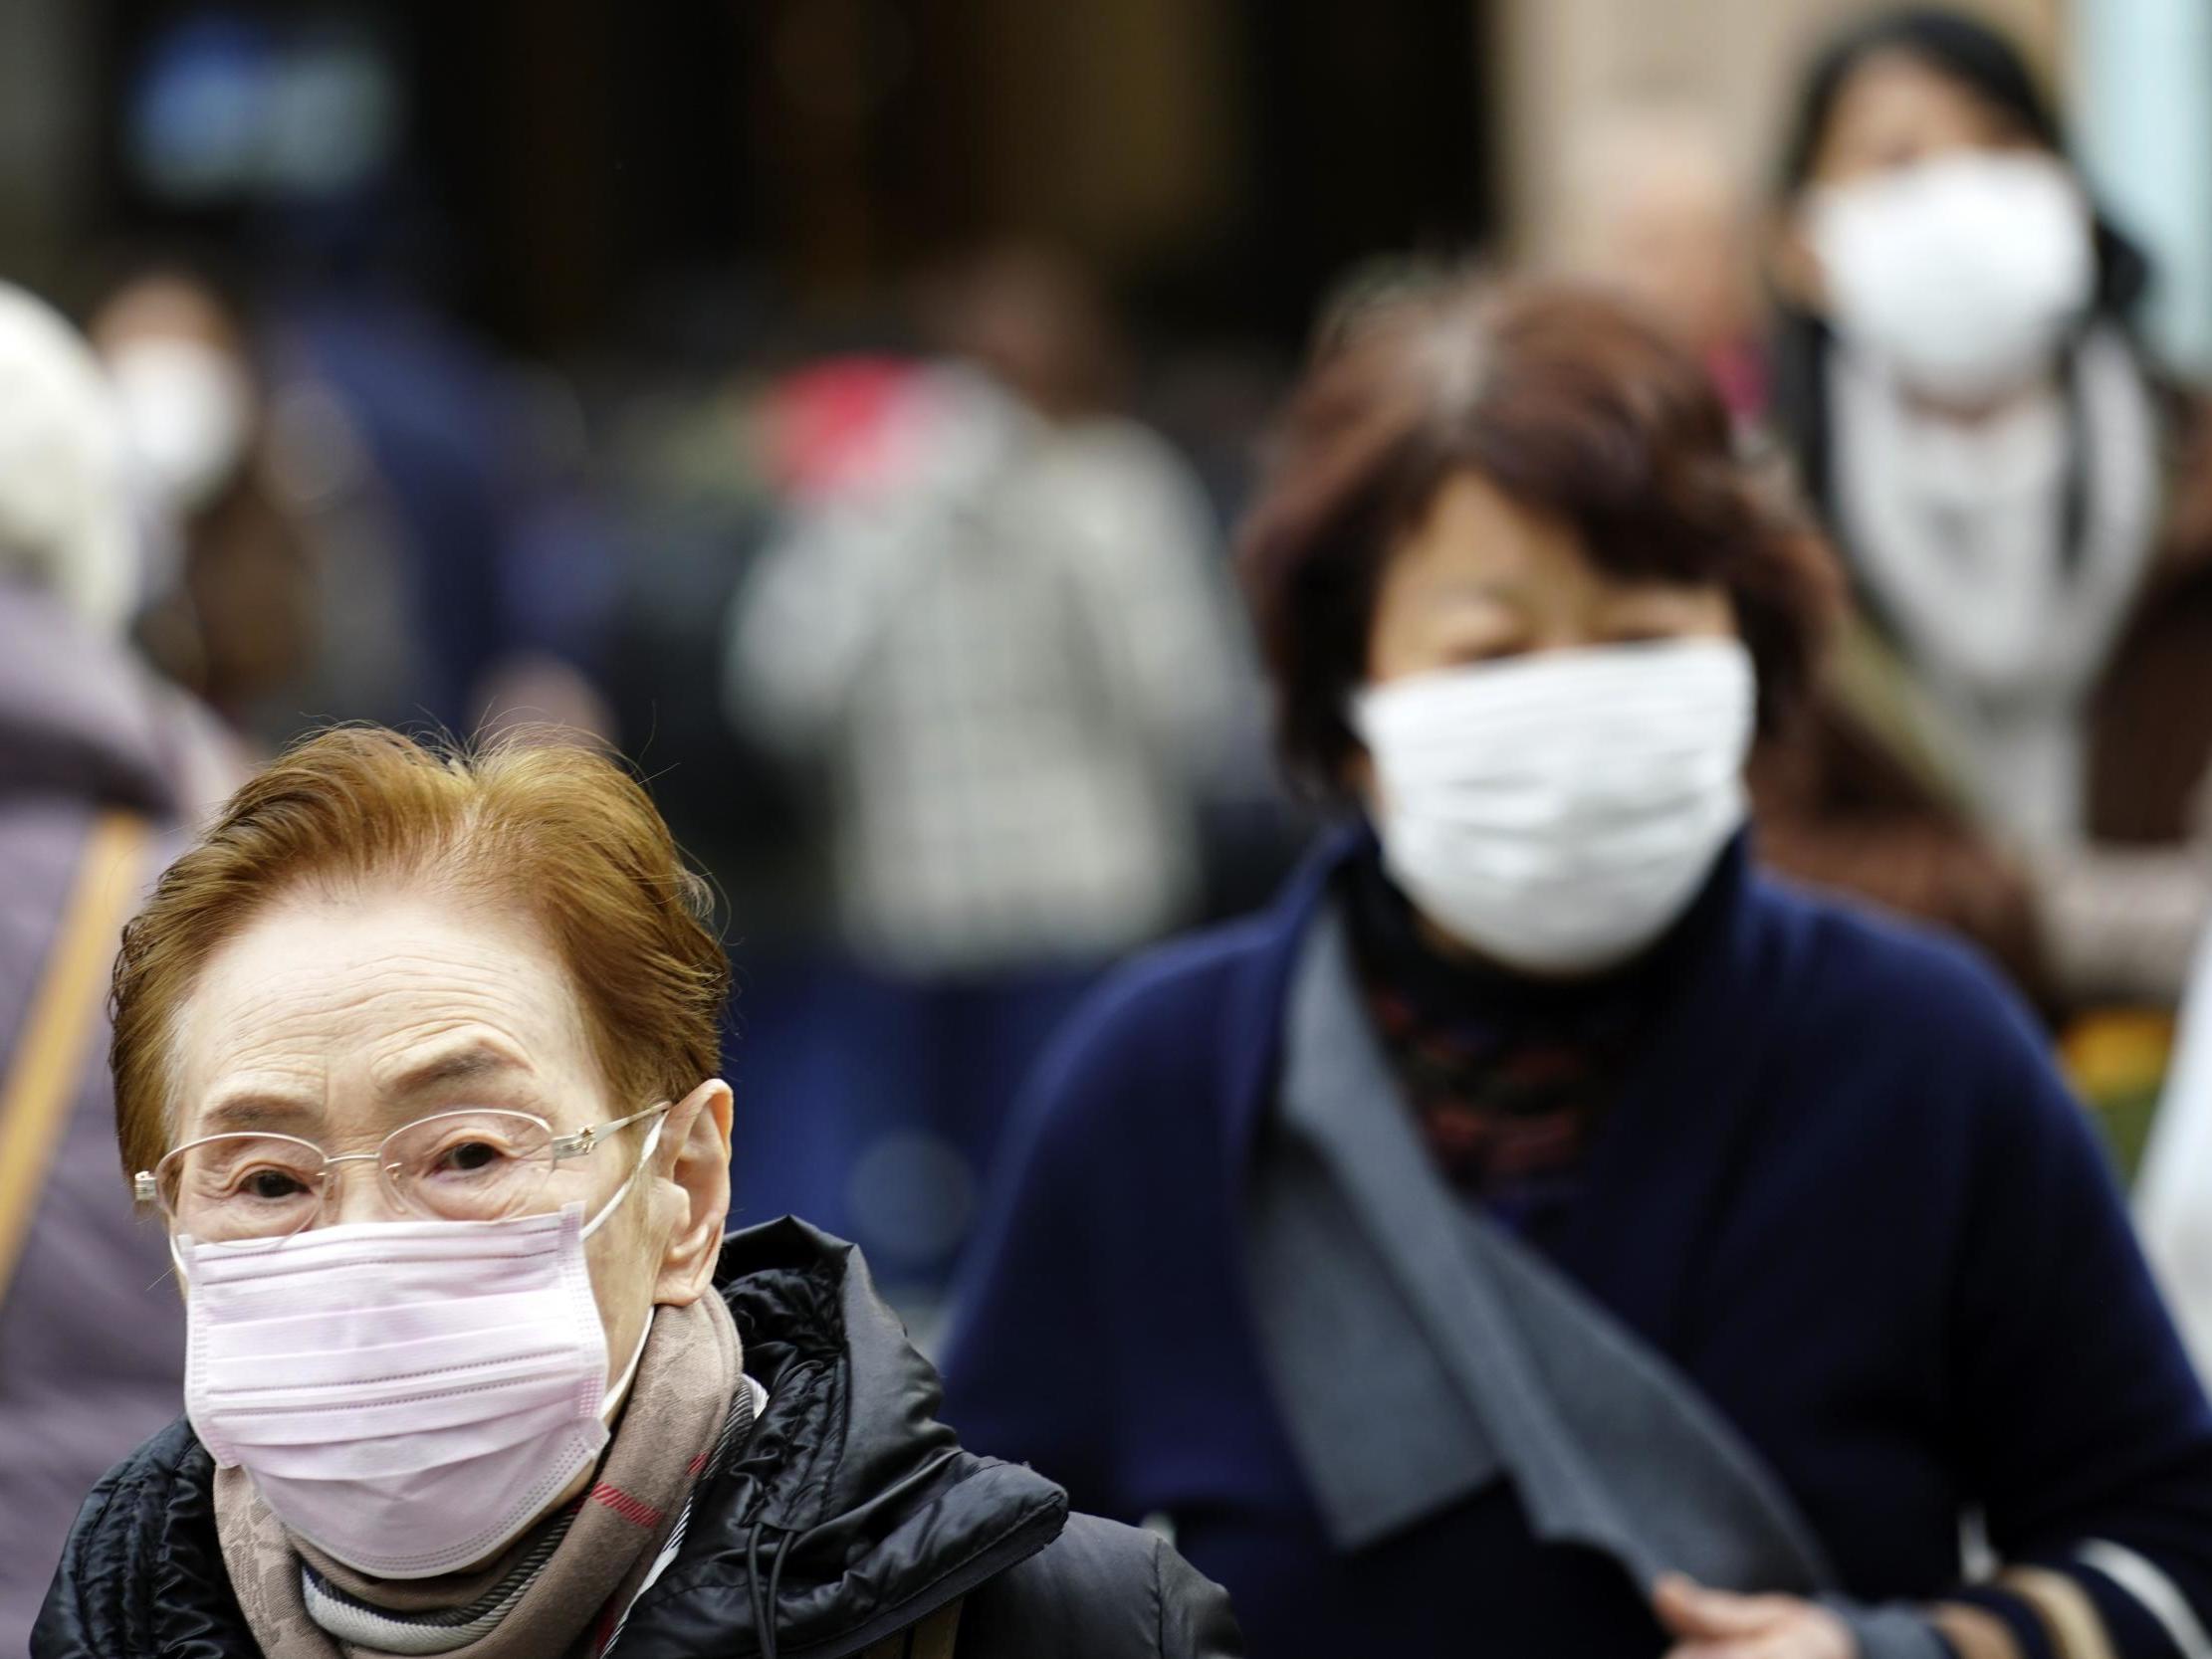 Chinese virus: Several US airports to screen travellers after mysterious outbreak ...6 日前